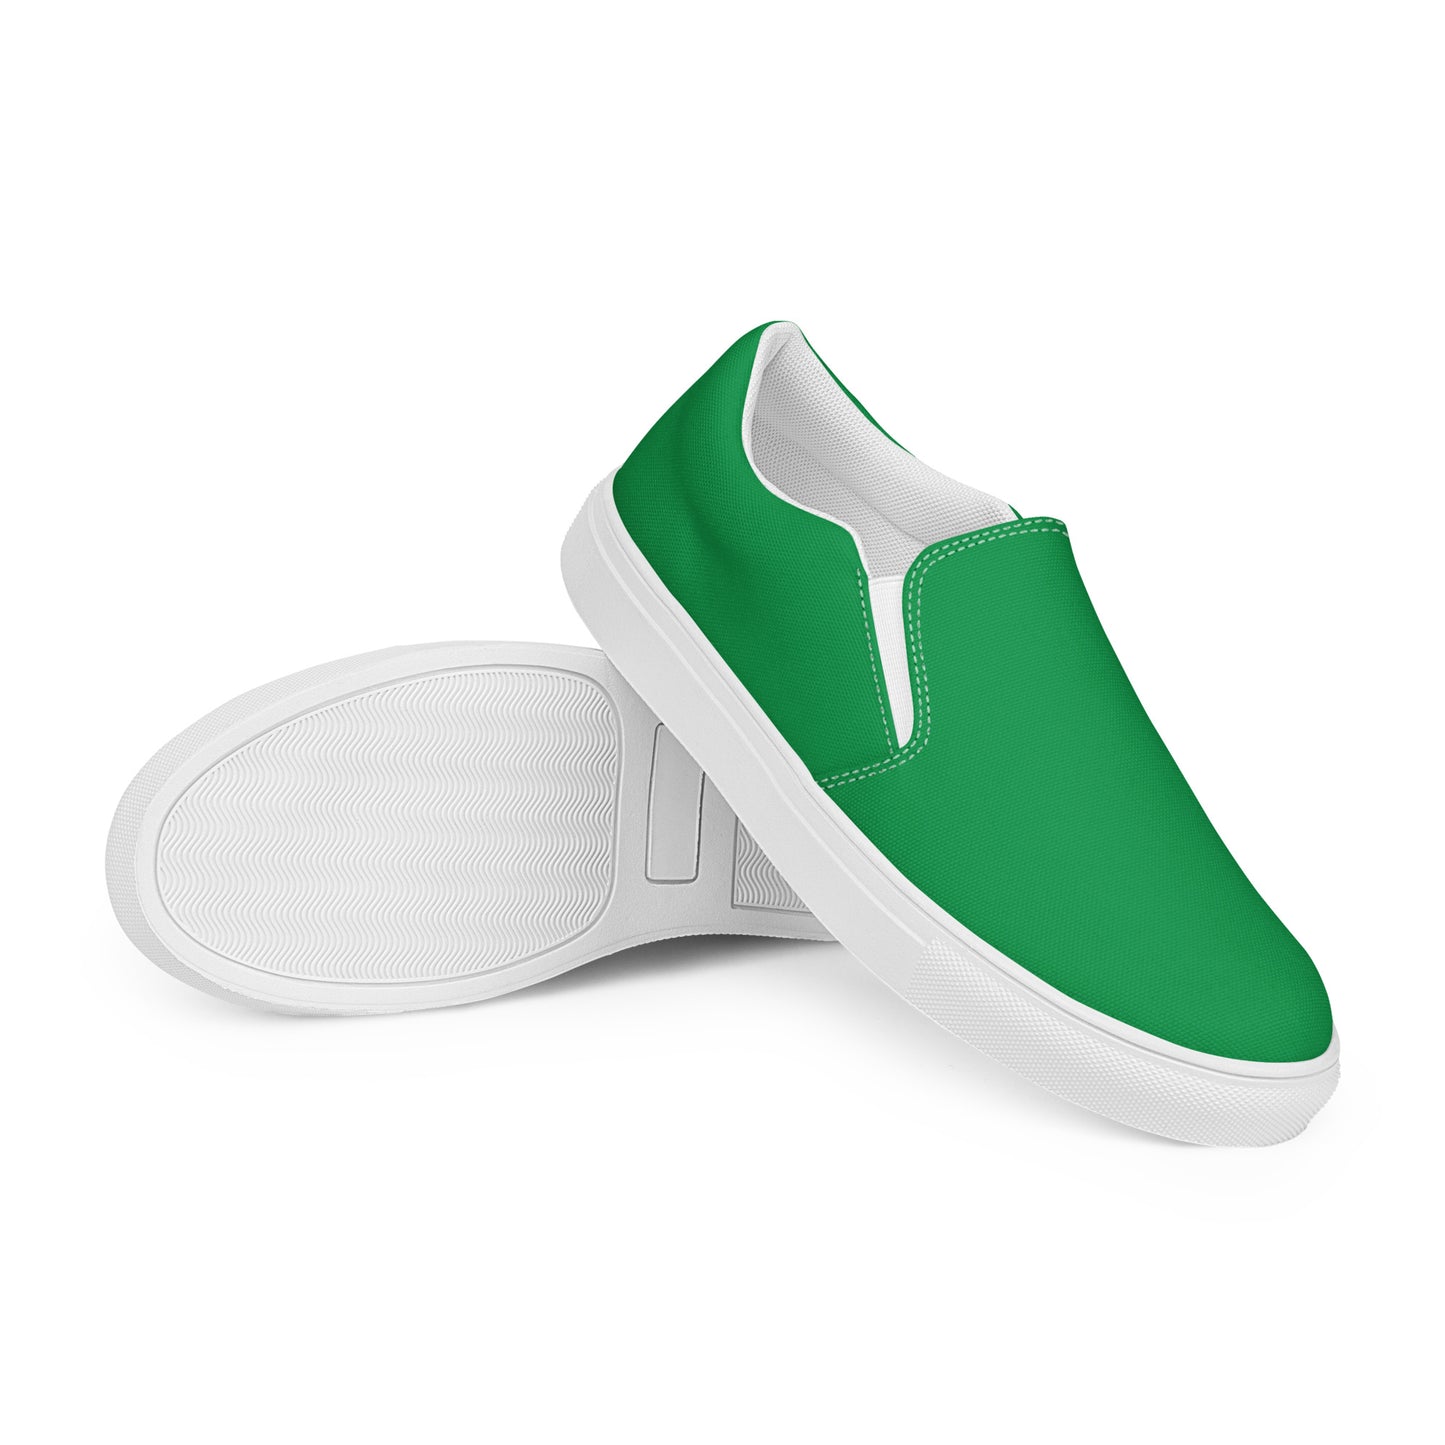 Basic Green - Sustainably Made Men's Slip-On Canvas Shoes